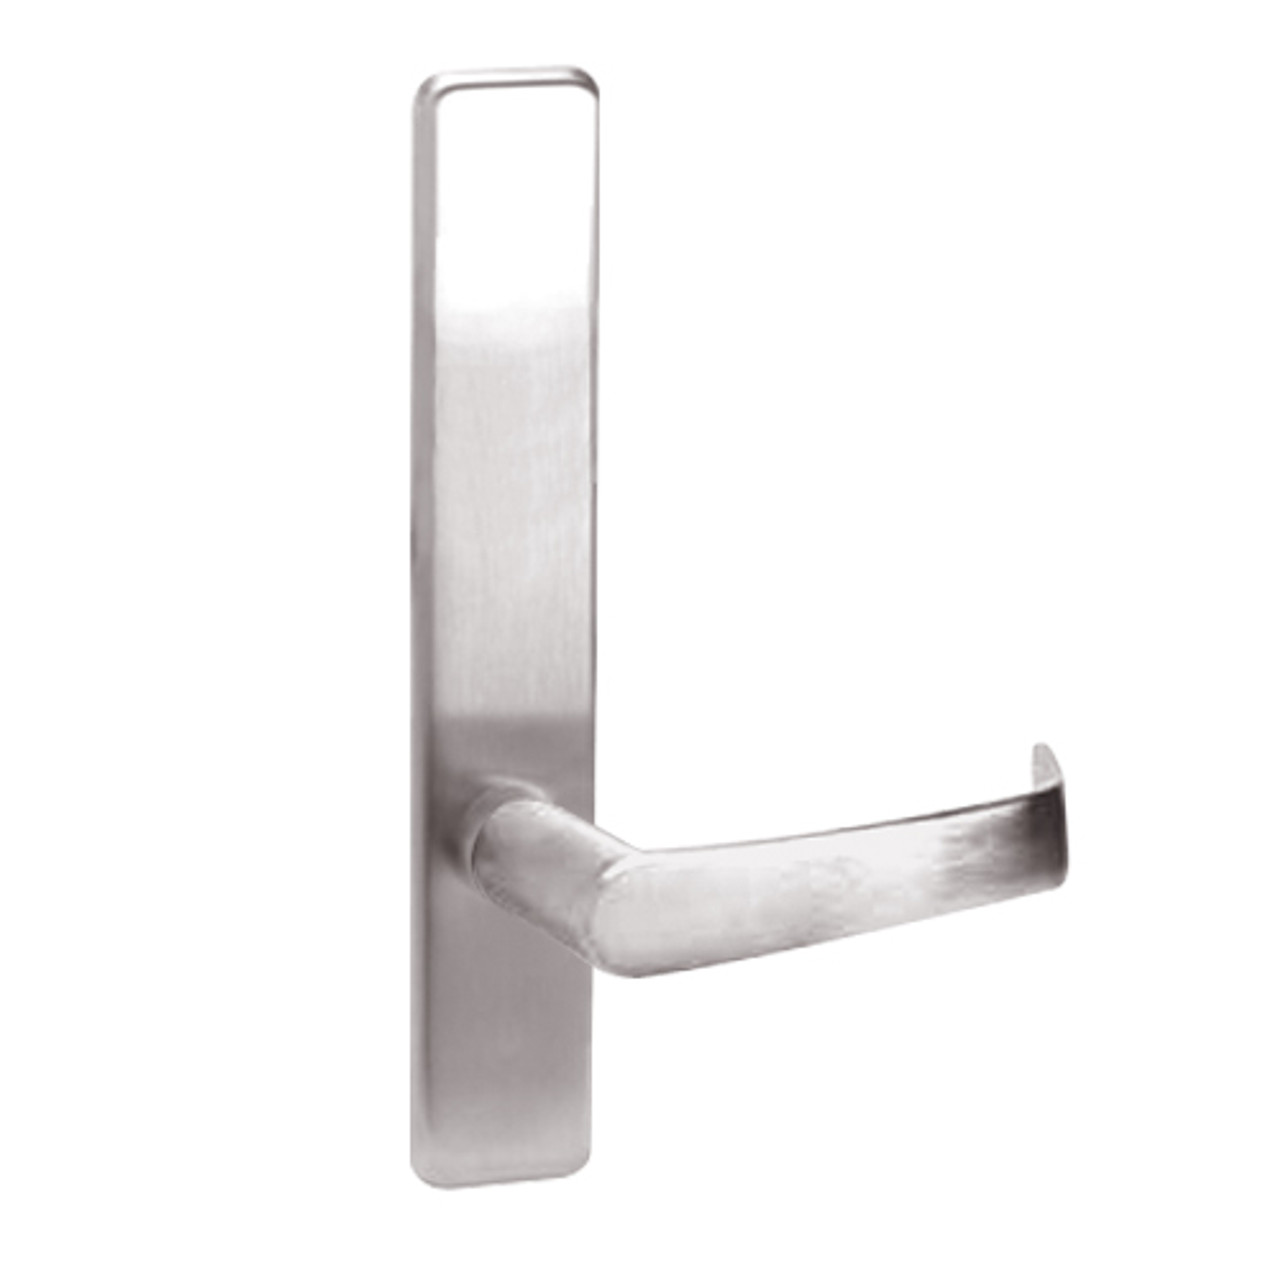 N850-629-LHR Corbin ED4000 Series Exit Device Trim with Dummy Newport Lever in Bright Stainless Steel Finish